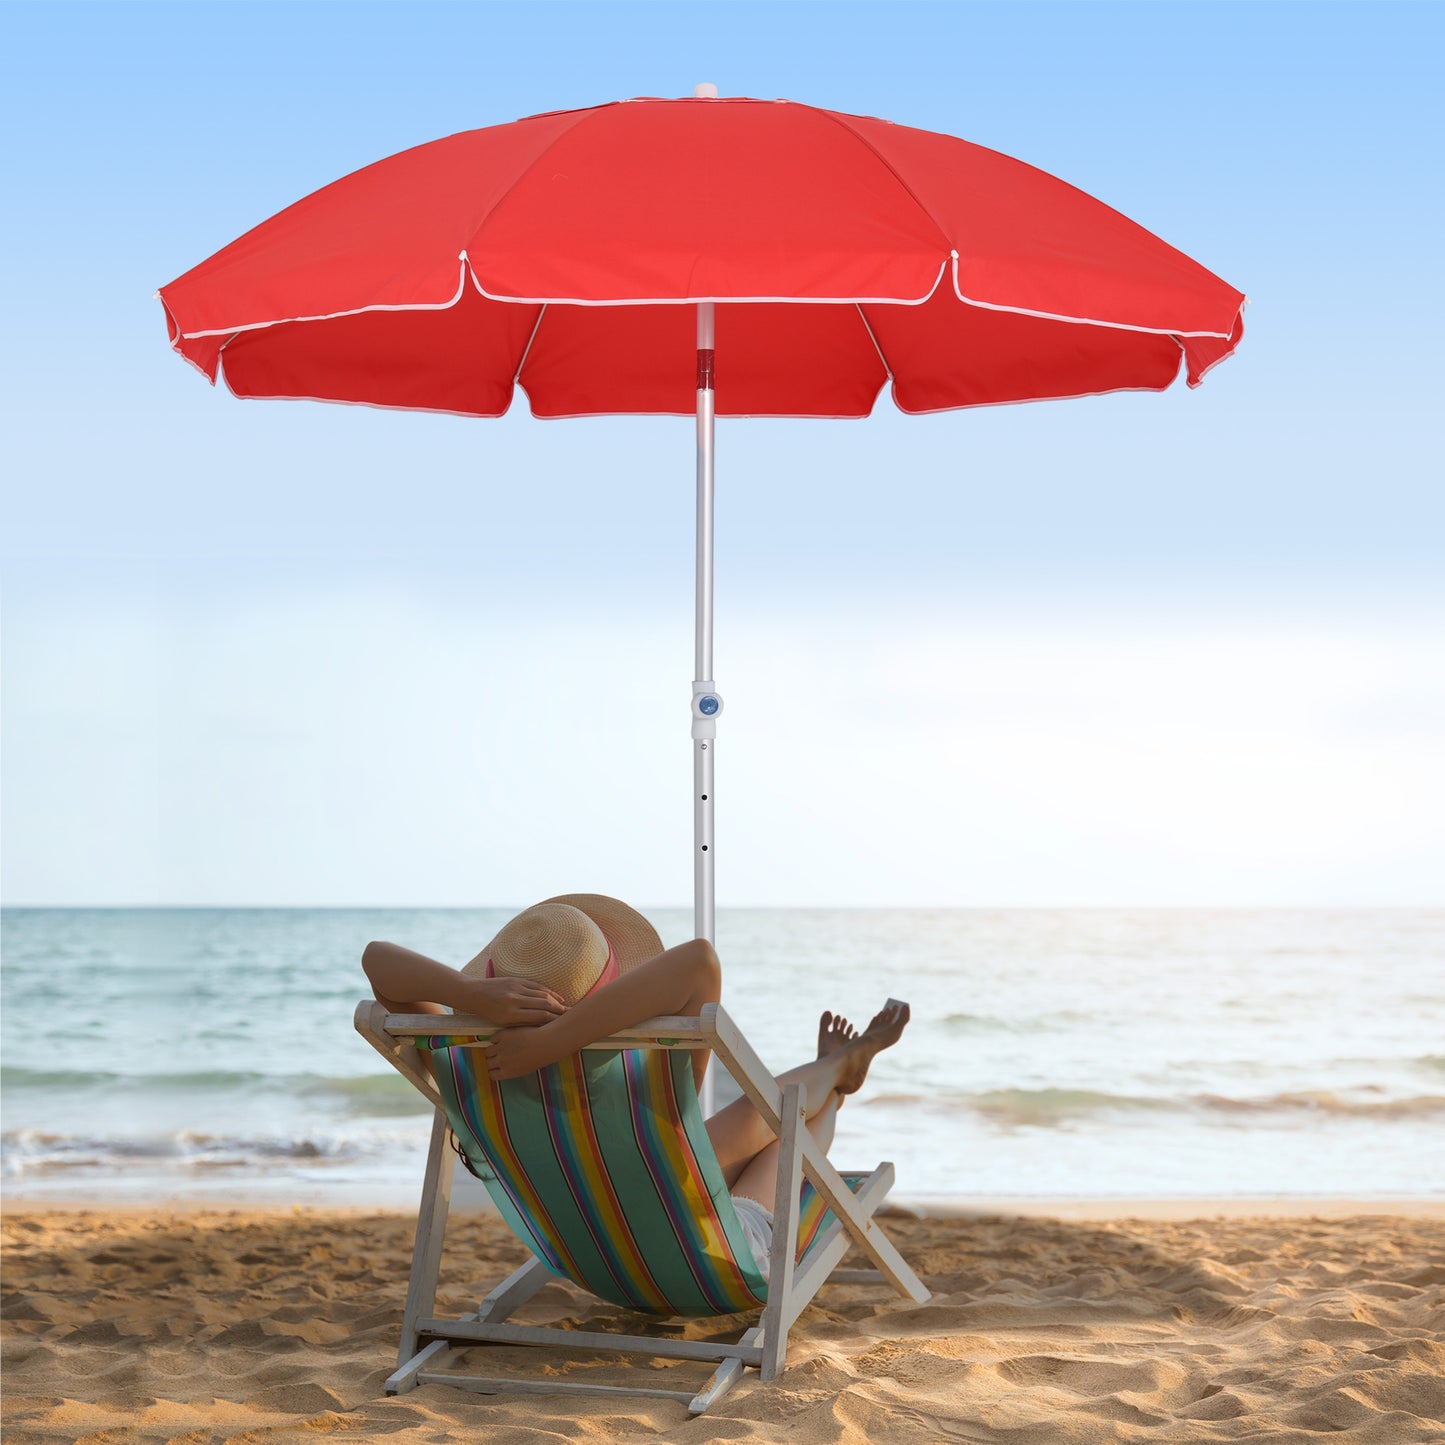 Outsunny Arc. 1.9m Beach Umbrella w/ Adjustable Angle Pointed Design Carry Bag Red